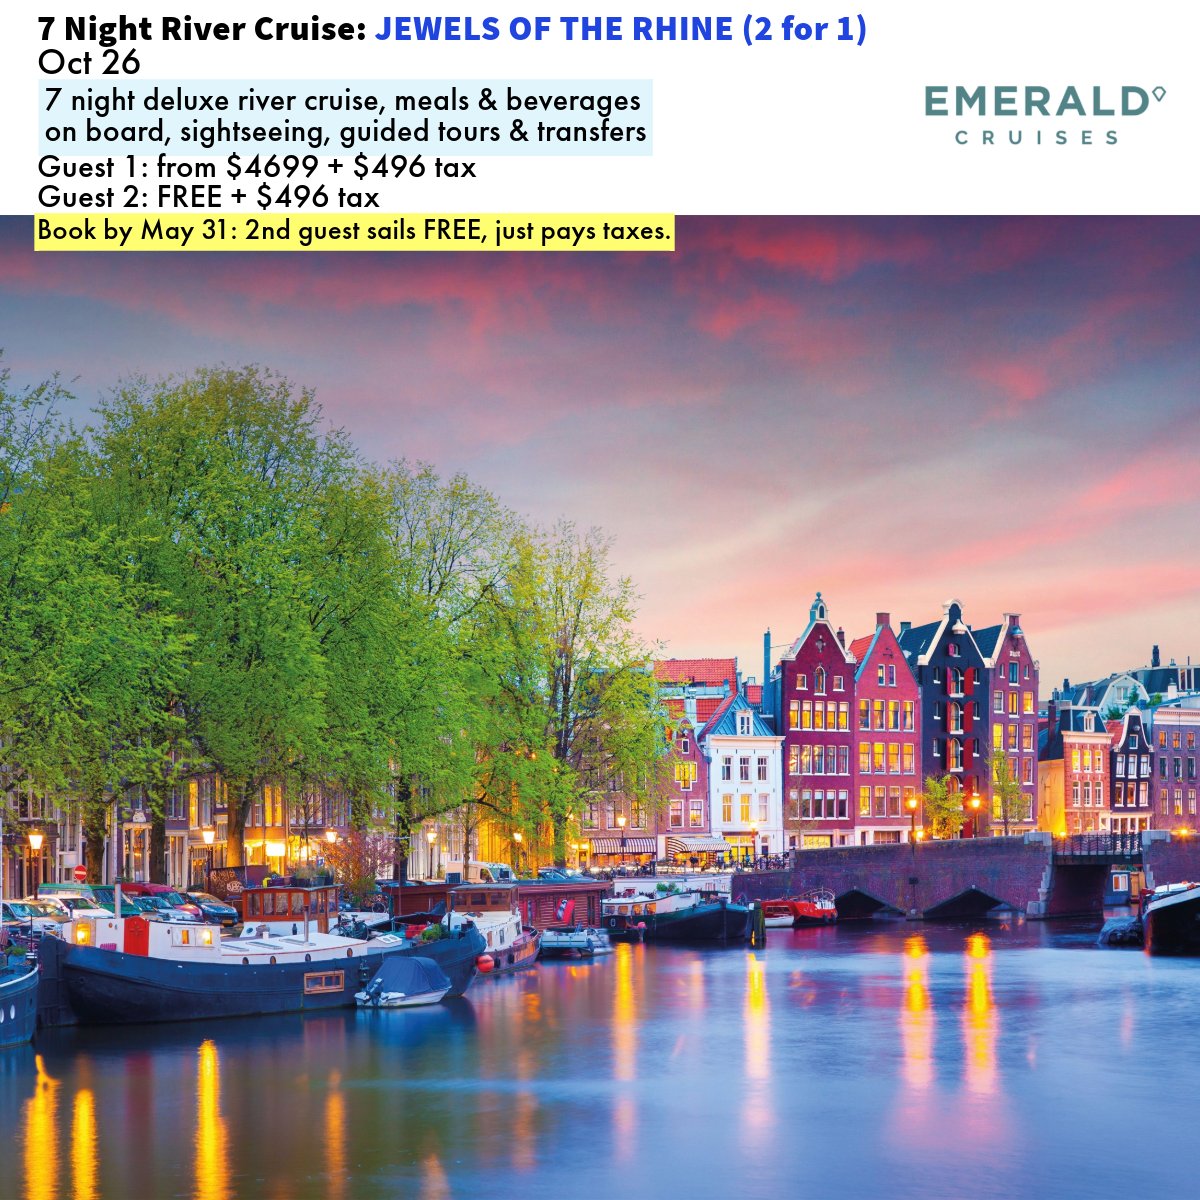 2 For 1 Emerald Cruises ⚓️
Ending soon!  Book by May 31!

#HobbitzTravel2024 #TravelBestBets2024
#2024VacationPlanning #EscapeTheRatRace 🐀
#VacationIsCalling2024🗺
#TheTimeToBookIsNow2024⏳
#Cruising2024🚢 #SetSail2024
#EmeraldCruises2024🍹
#PictureYourselfHere2024📷